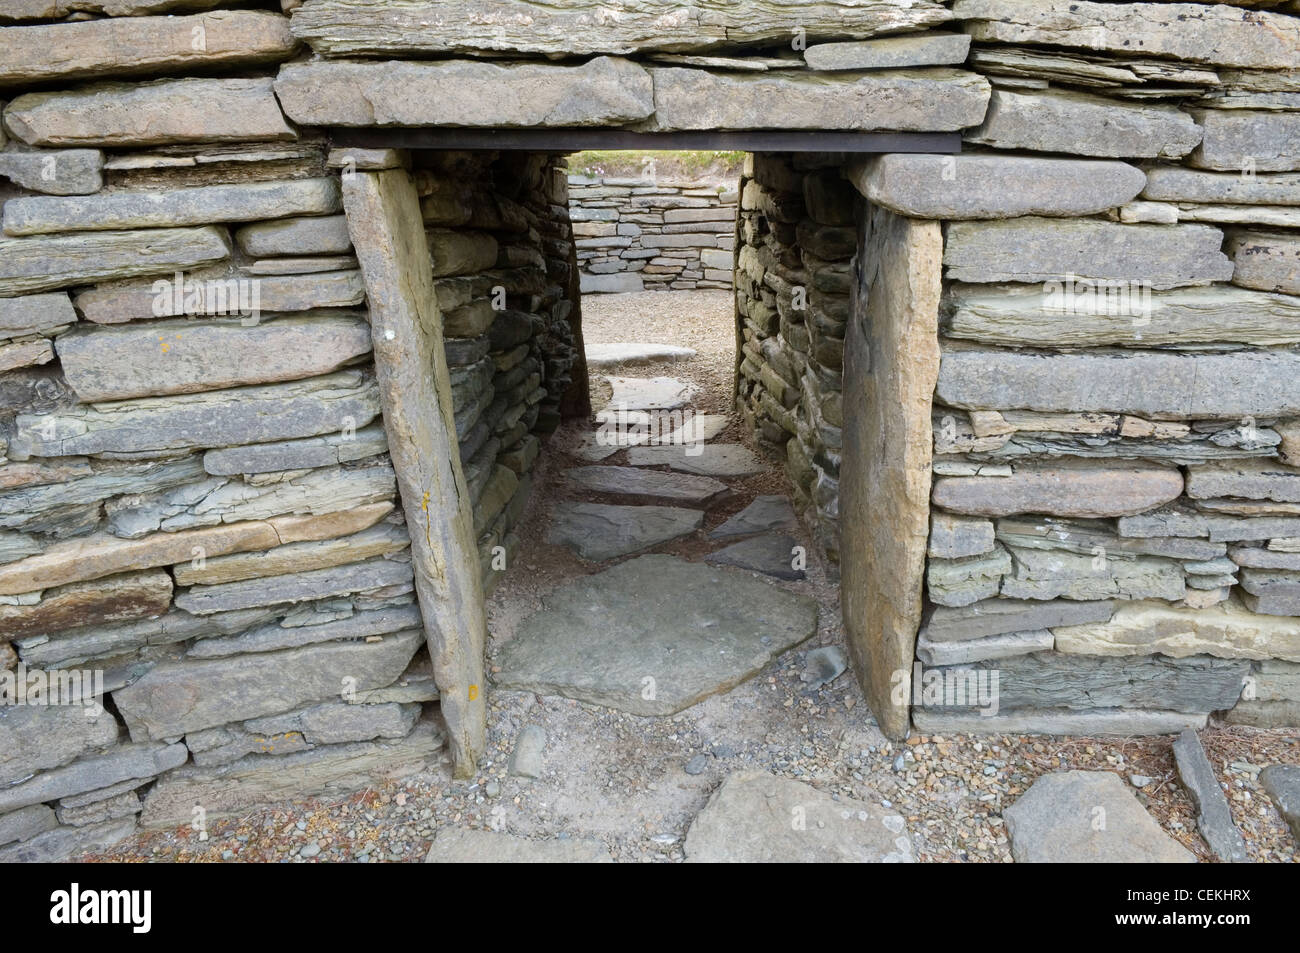 Interior of the Knap of Howar, a preserved neolithic farmstead on the island of Papa Westray, Orkney Islands, Scotland. Stock Photo